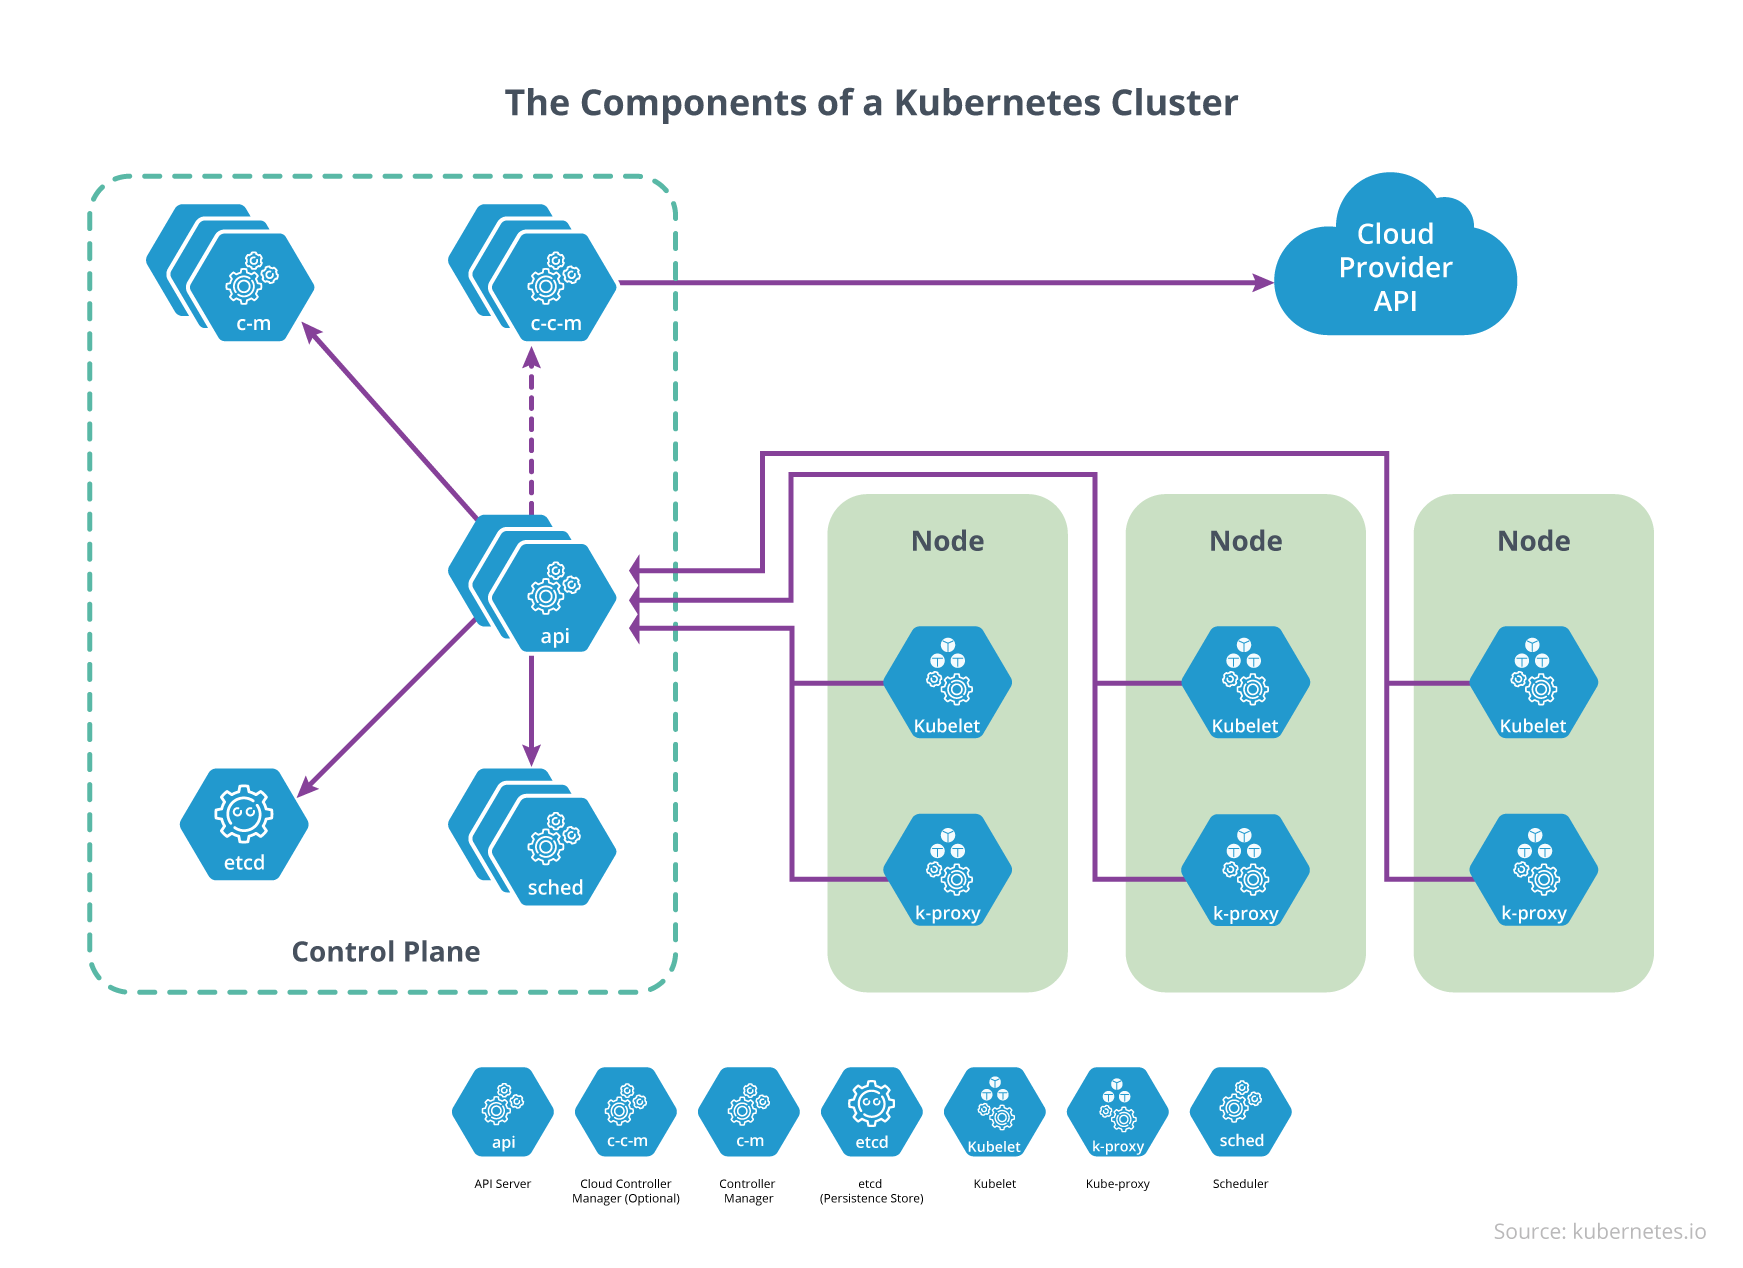 The Components of a Kubernetes Cluster